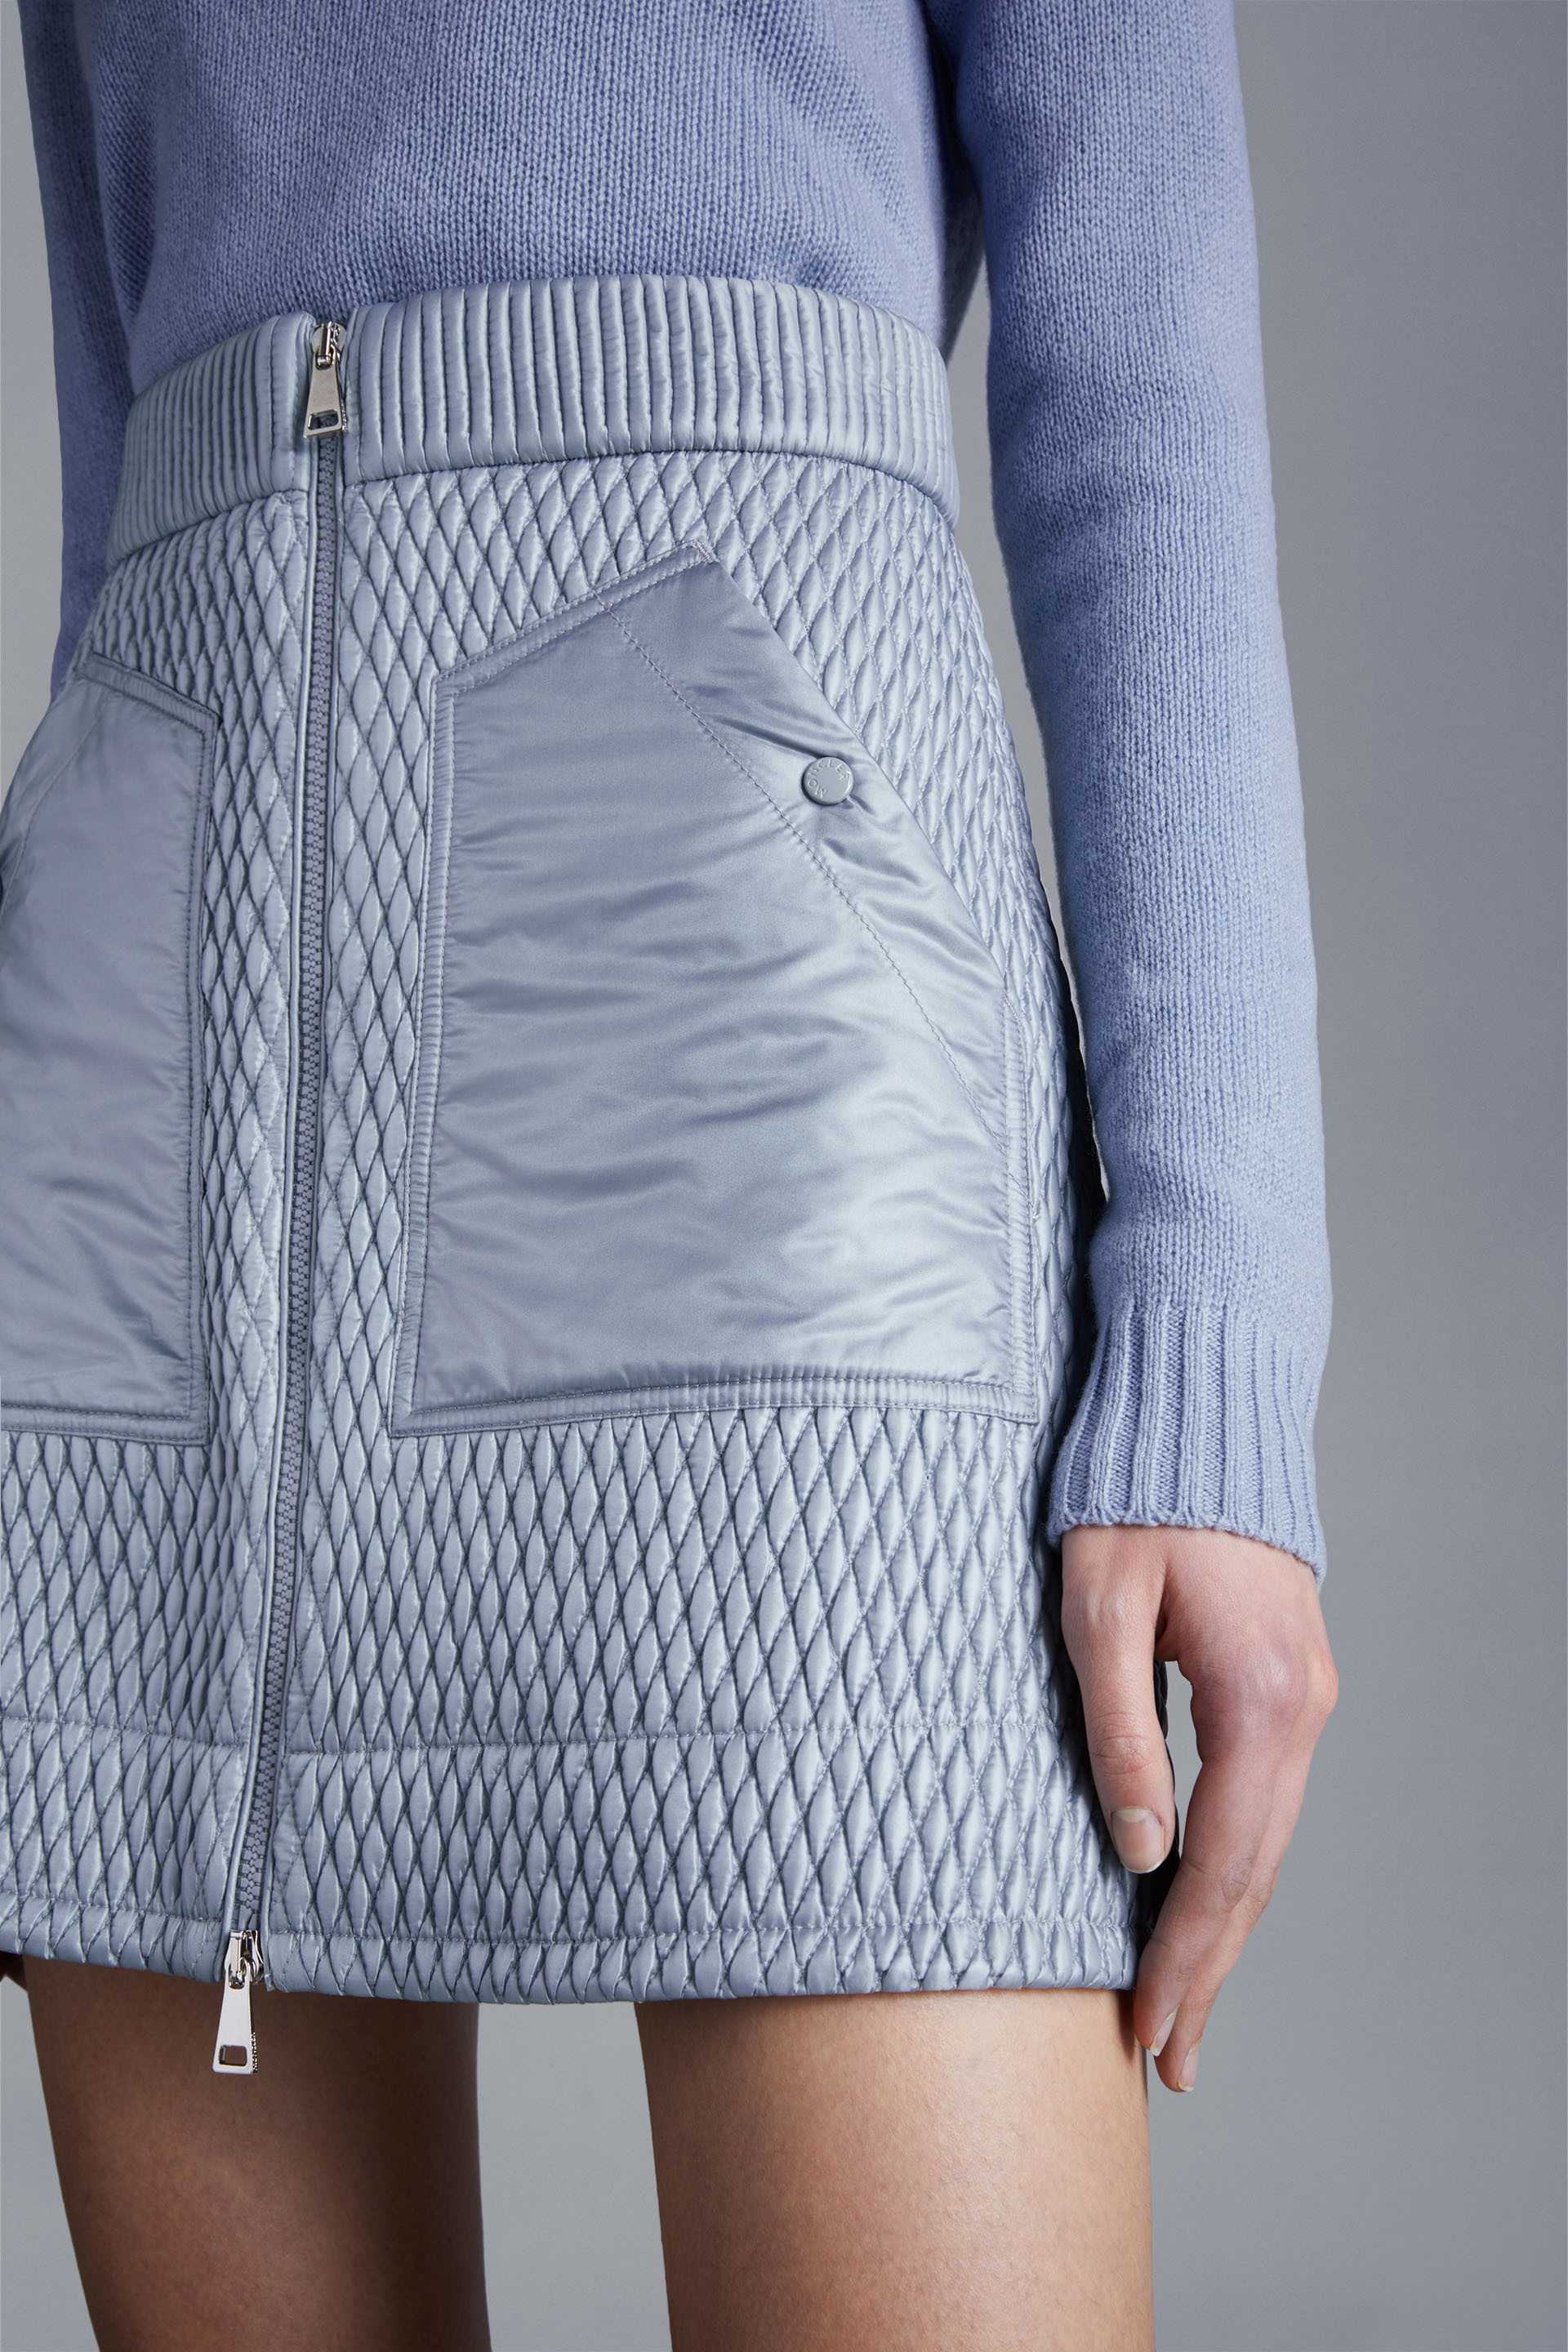 Moncler UK Online Shop — Down jackets, coats and clothing